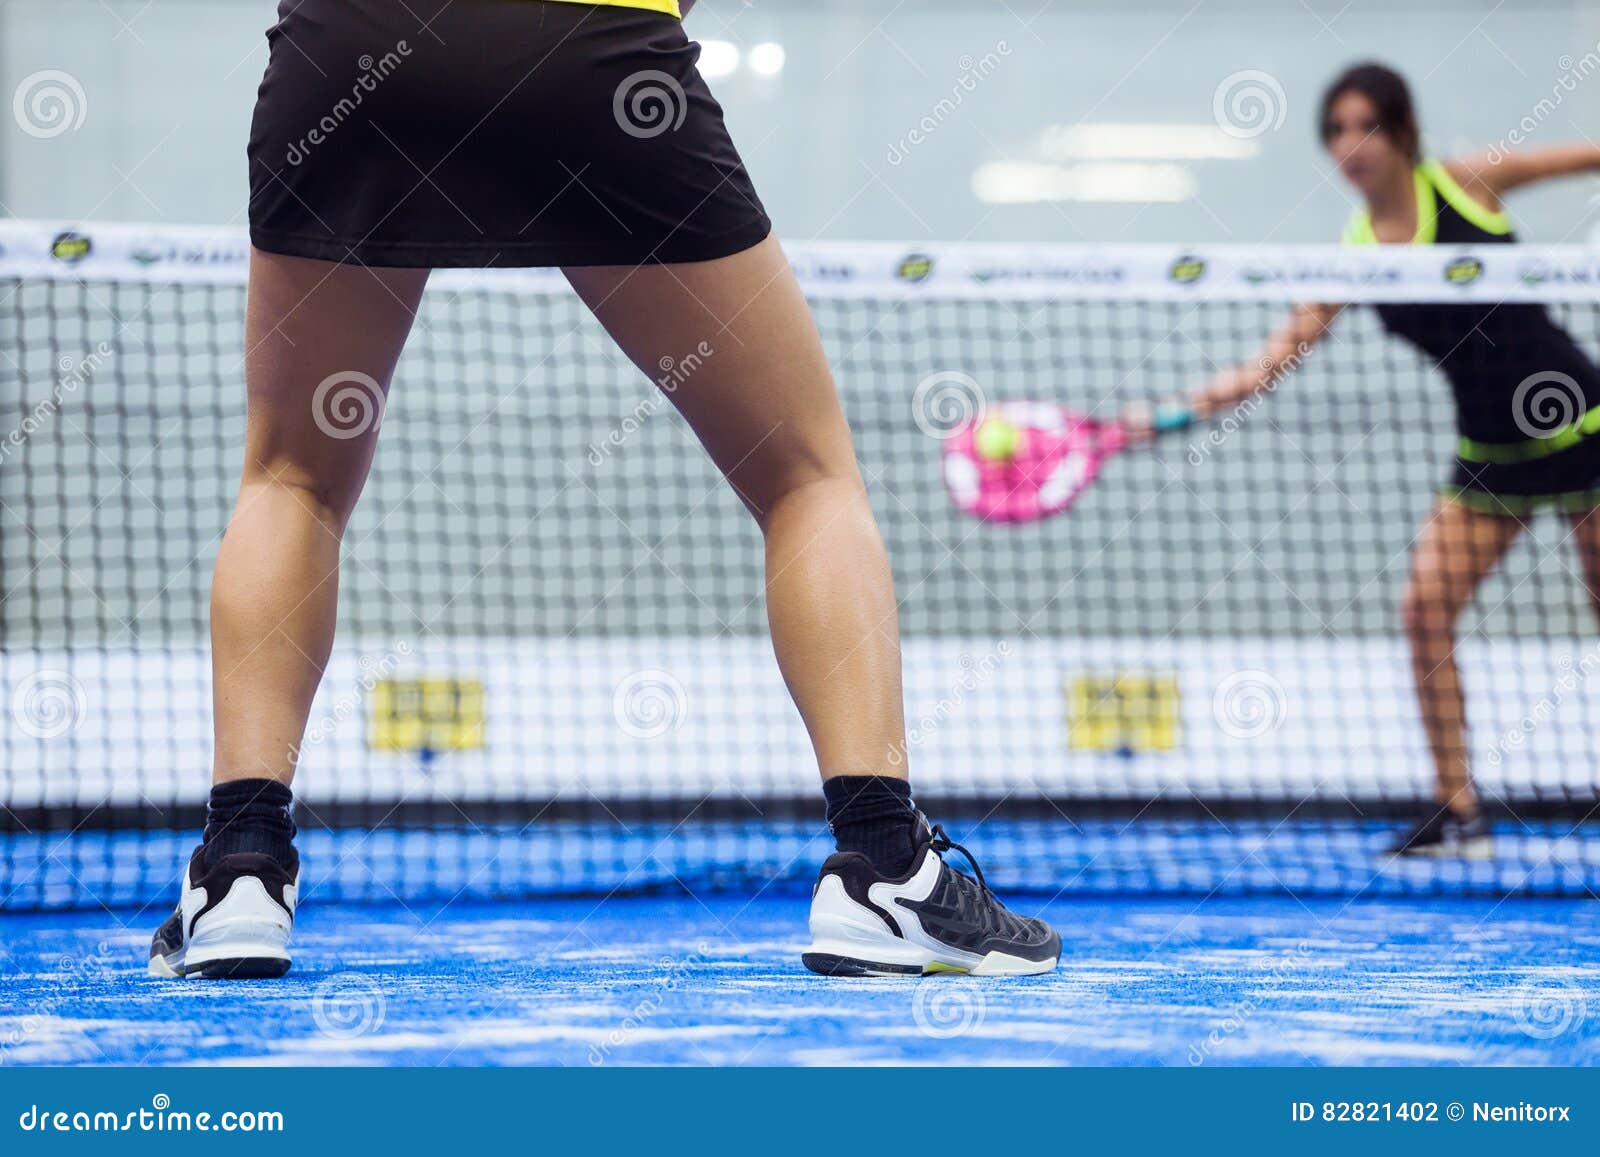 Little Girl Playing Tennis On The Court Stock Image 